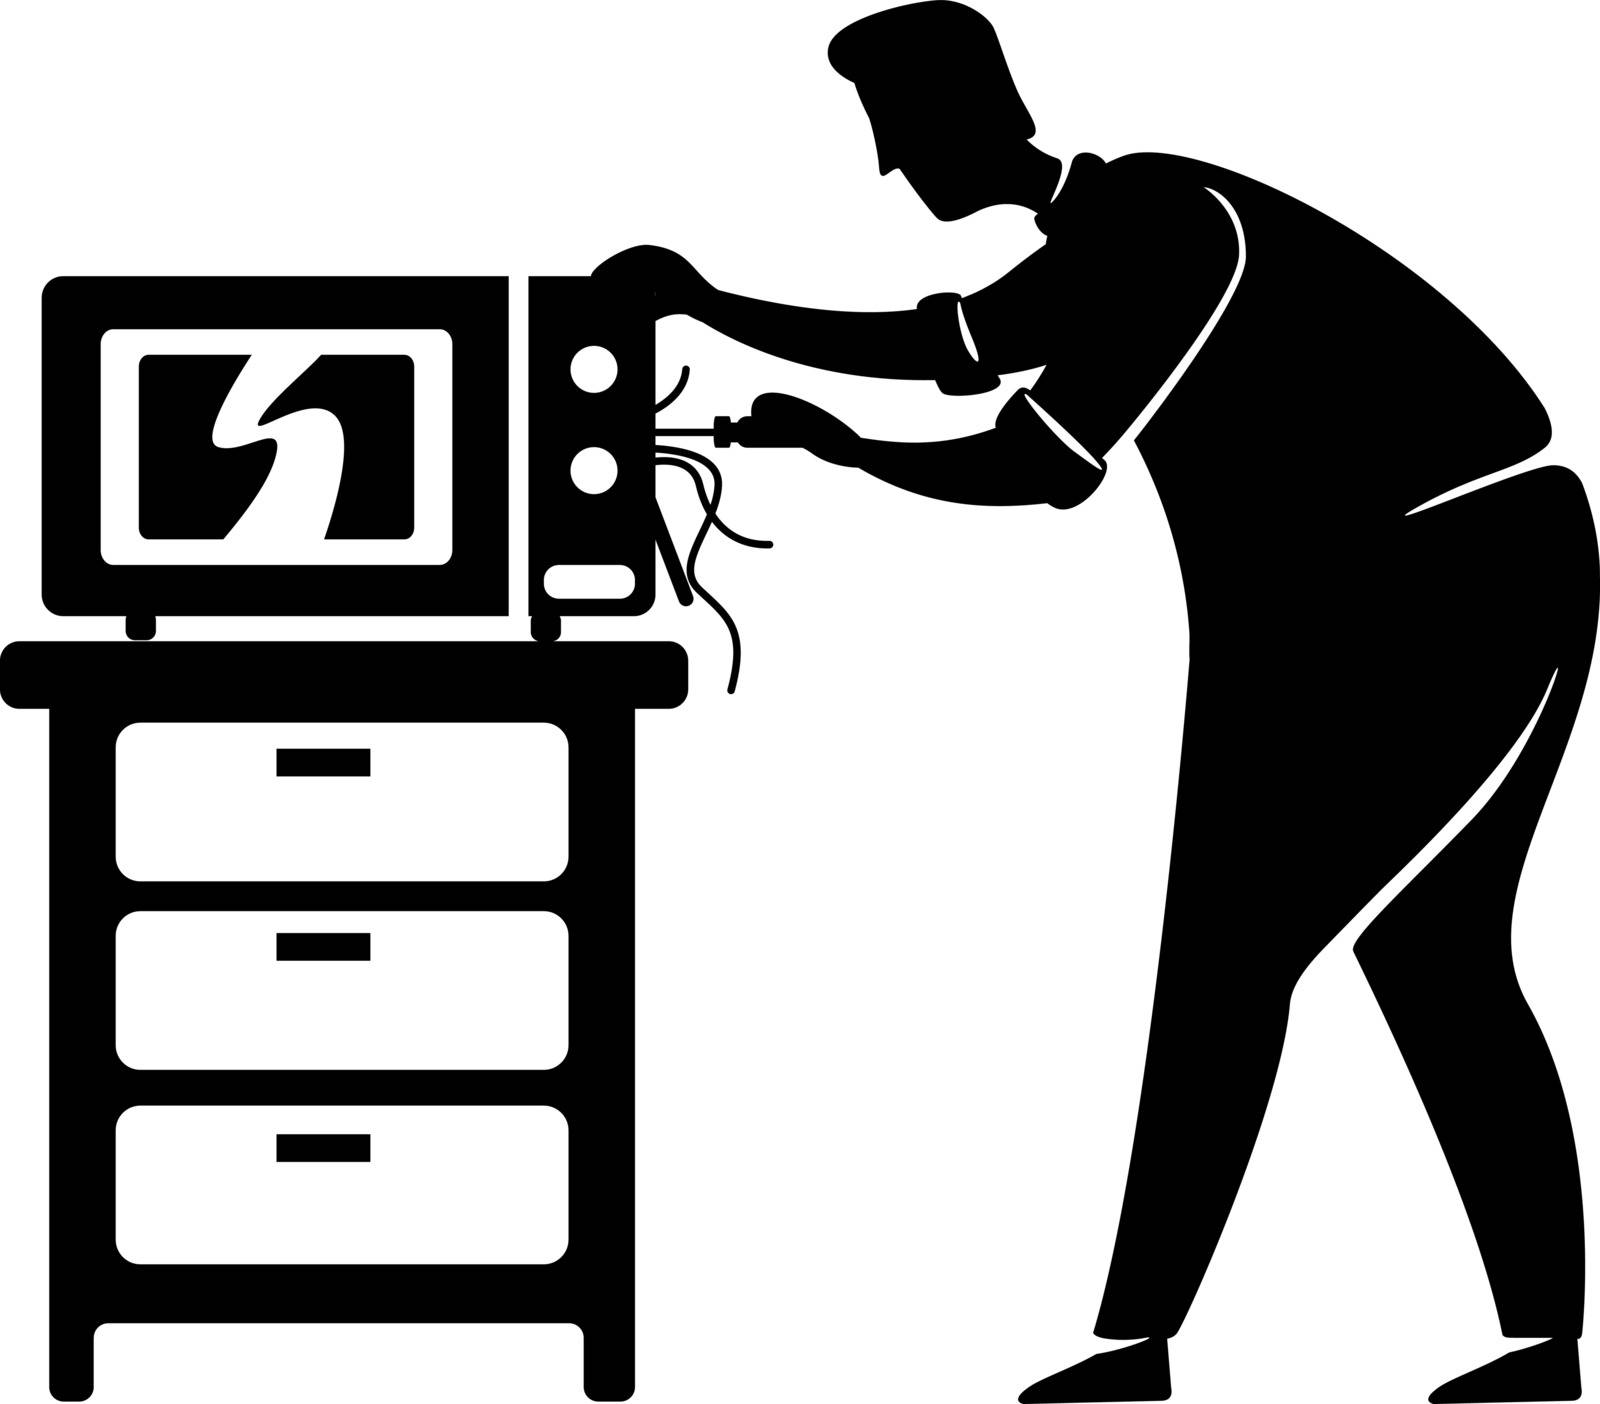 Man fixed microwave black silhouette vector illustration. Guy repairs oven. Home maintenance. Working person pose. Handyman 2d cartoon character shape for commercial, animation, printing. ZIP file contains: EPS, JPG.